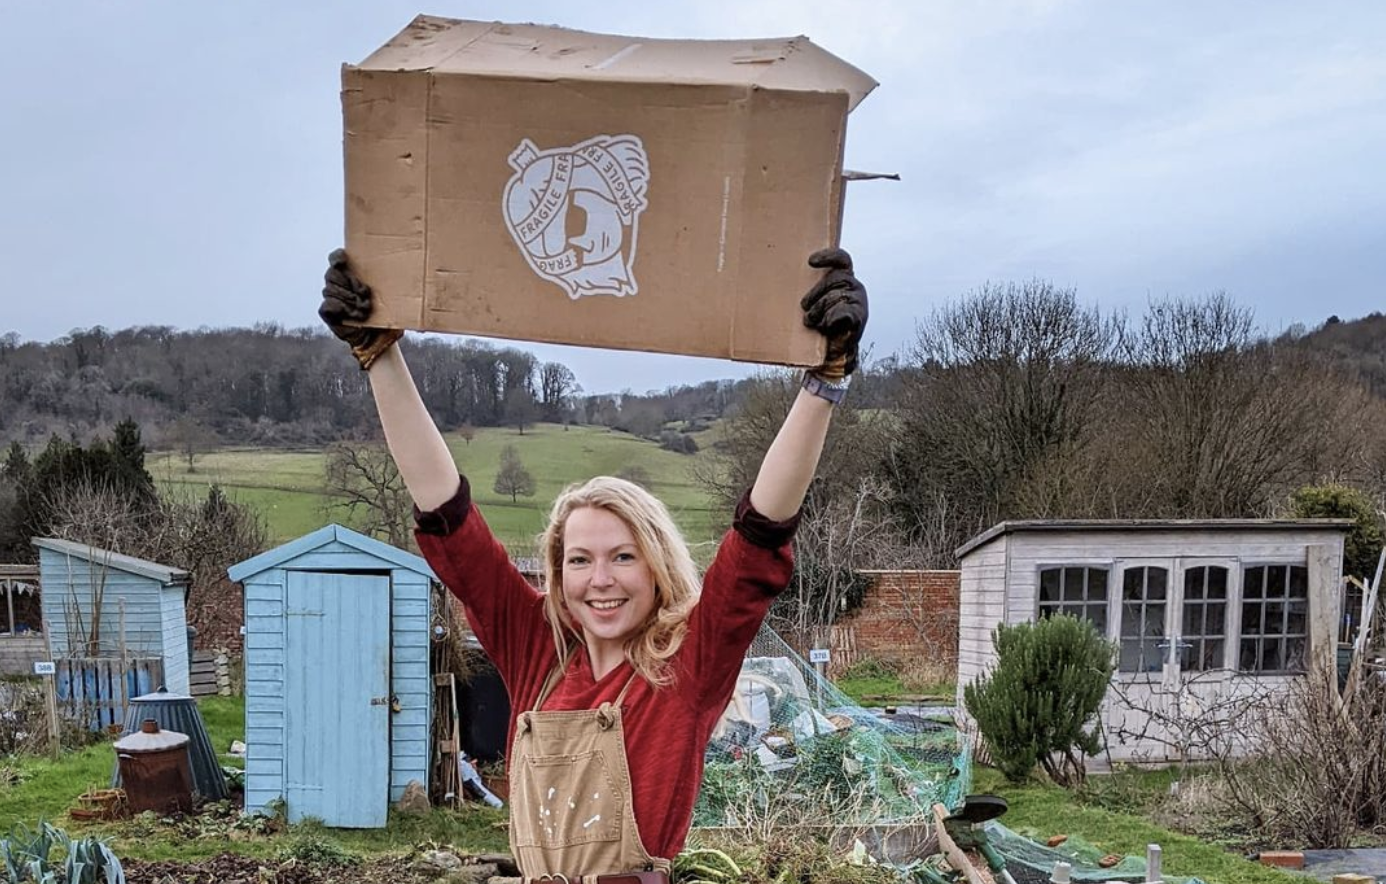 Jenny on her allotment holding a sheet of cardboard above her head